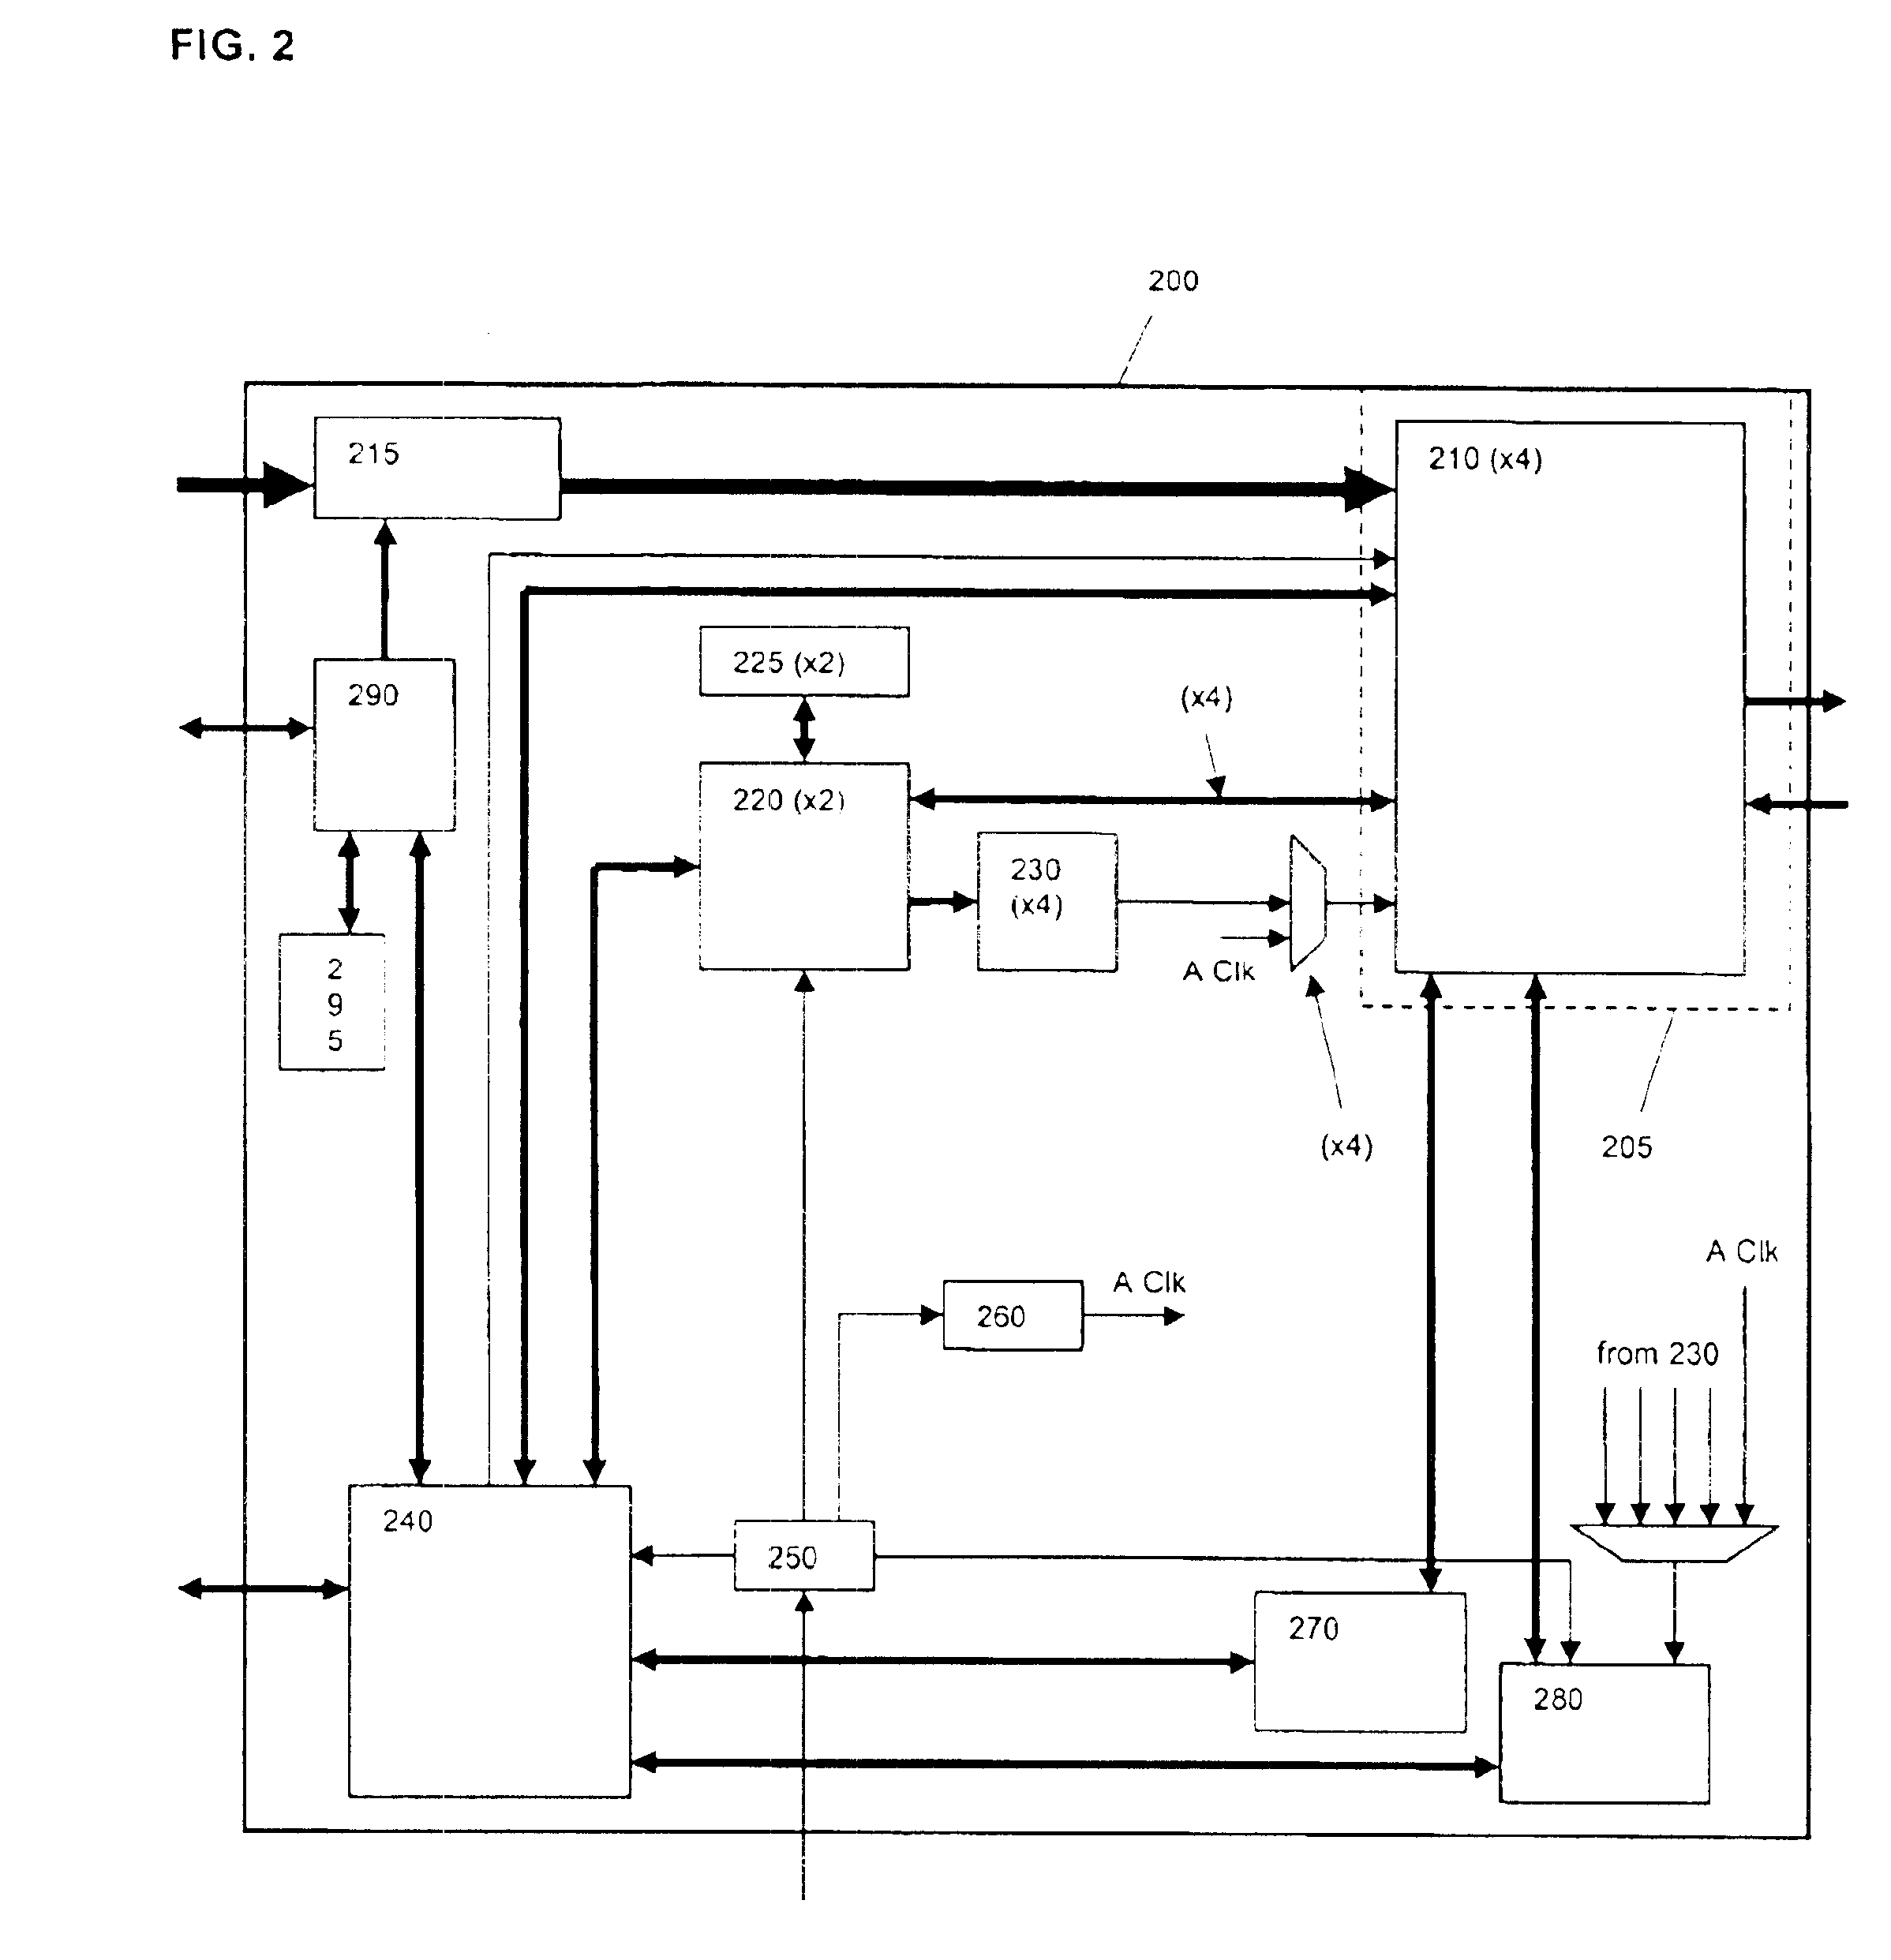 Test instrument with multiple analog modules